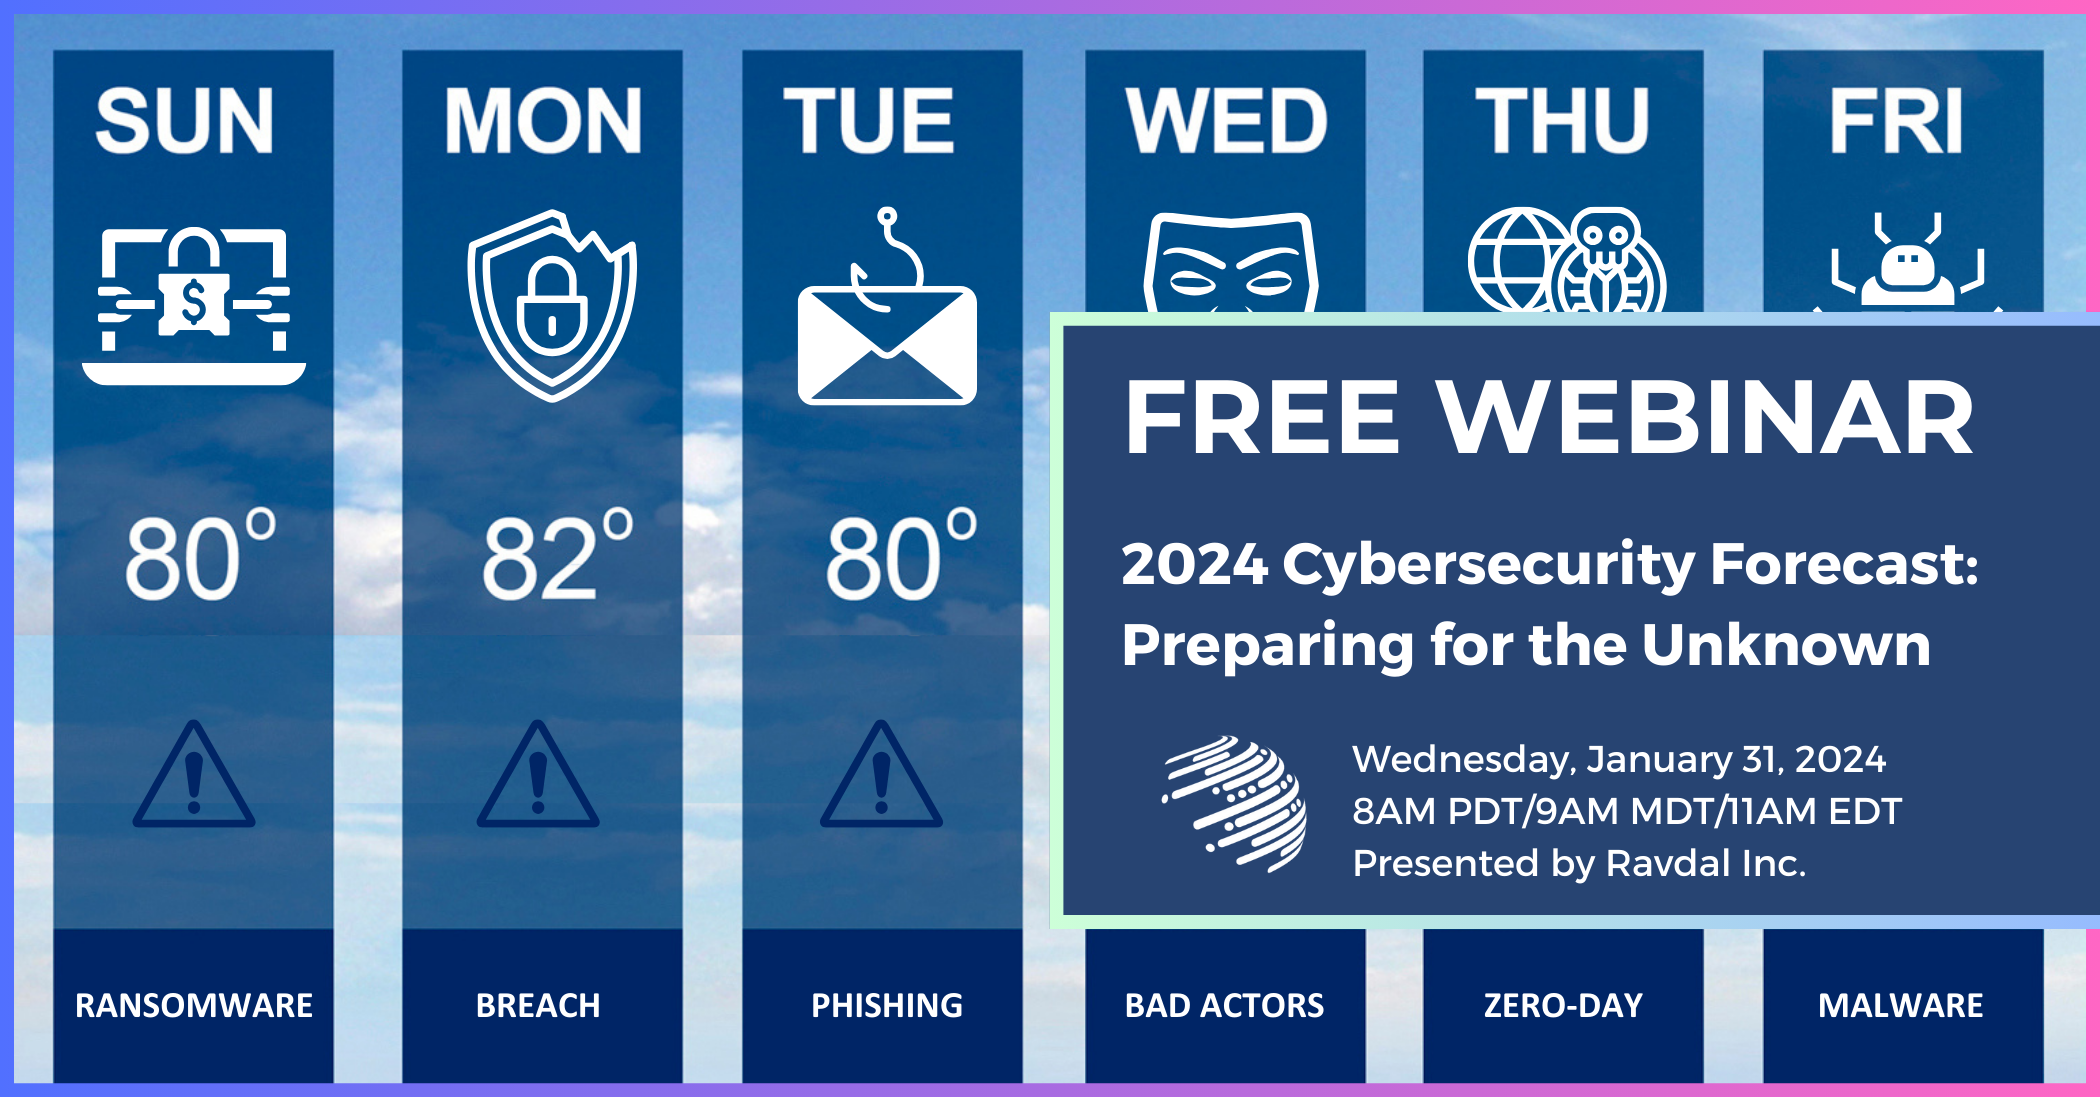 2024 Cybersecurity Forecast: Preparing for the Unknown